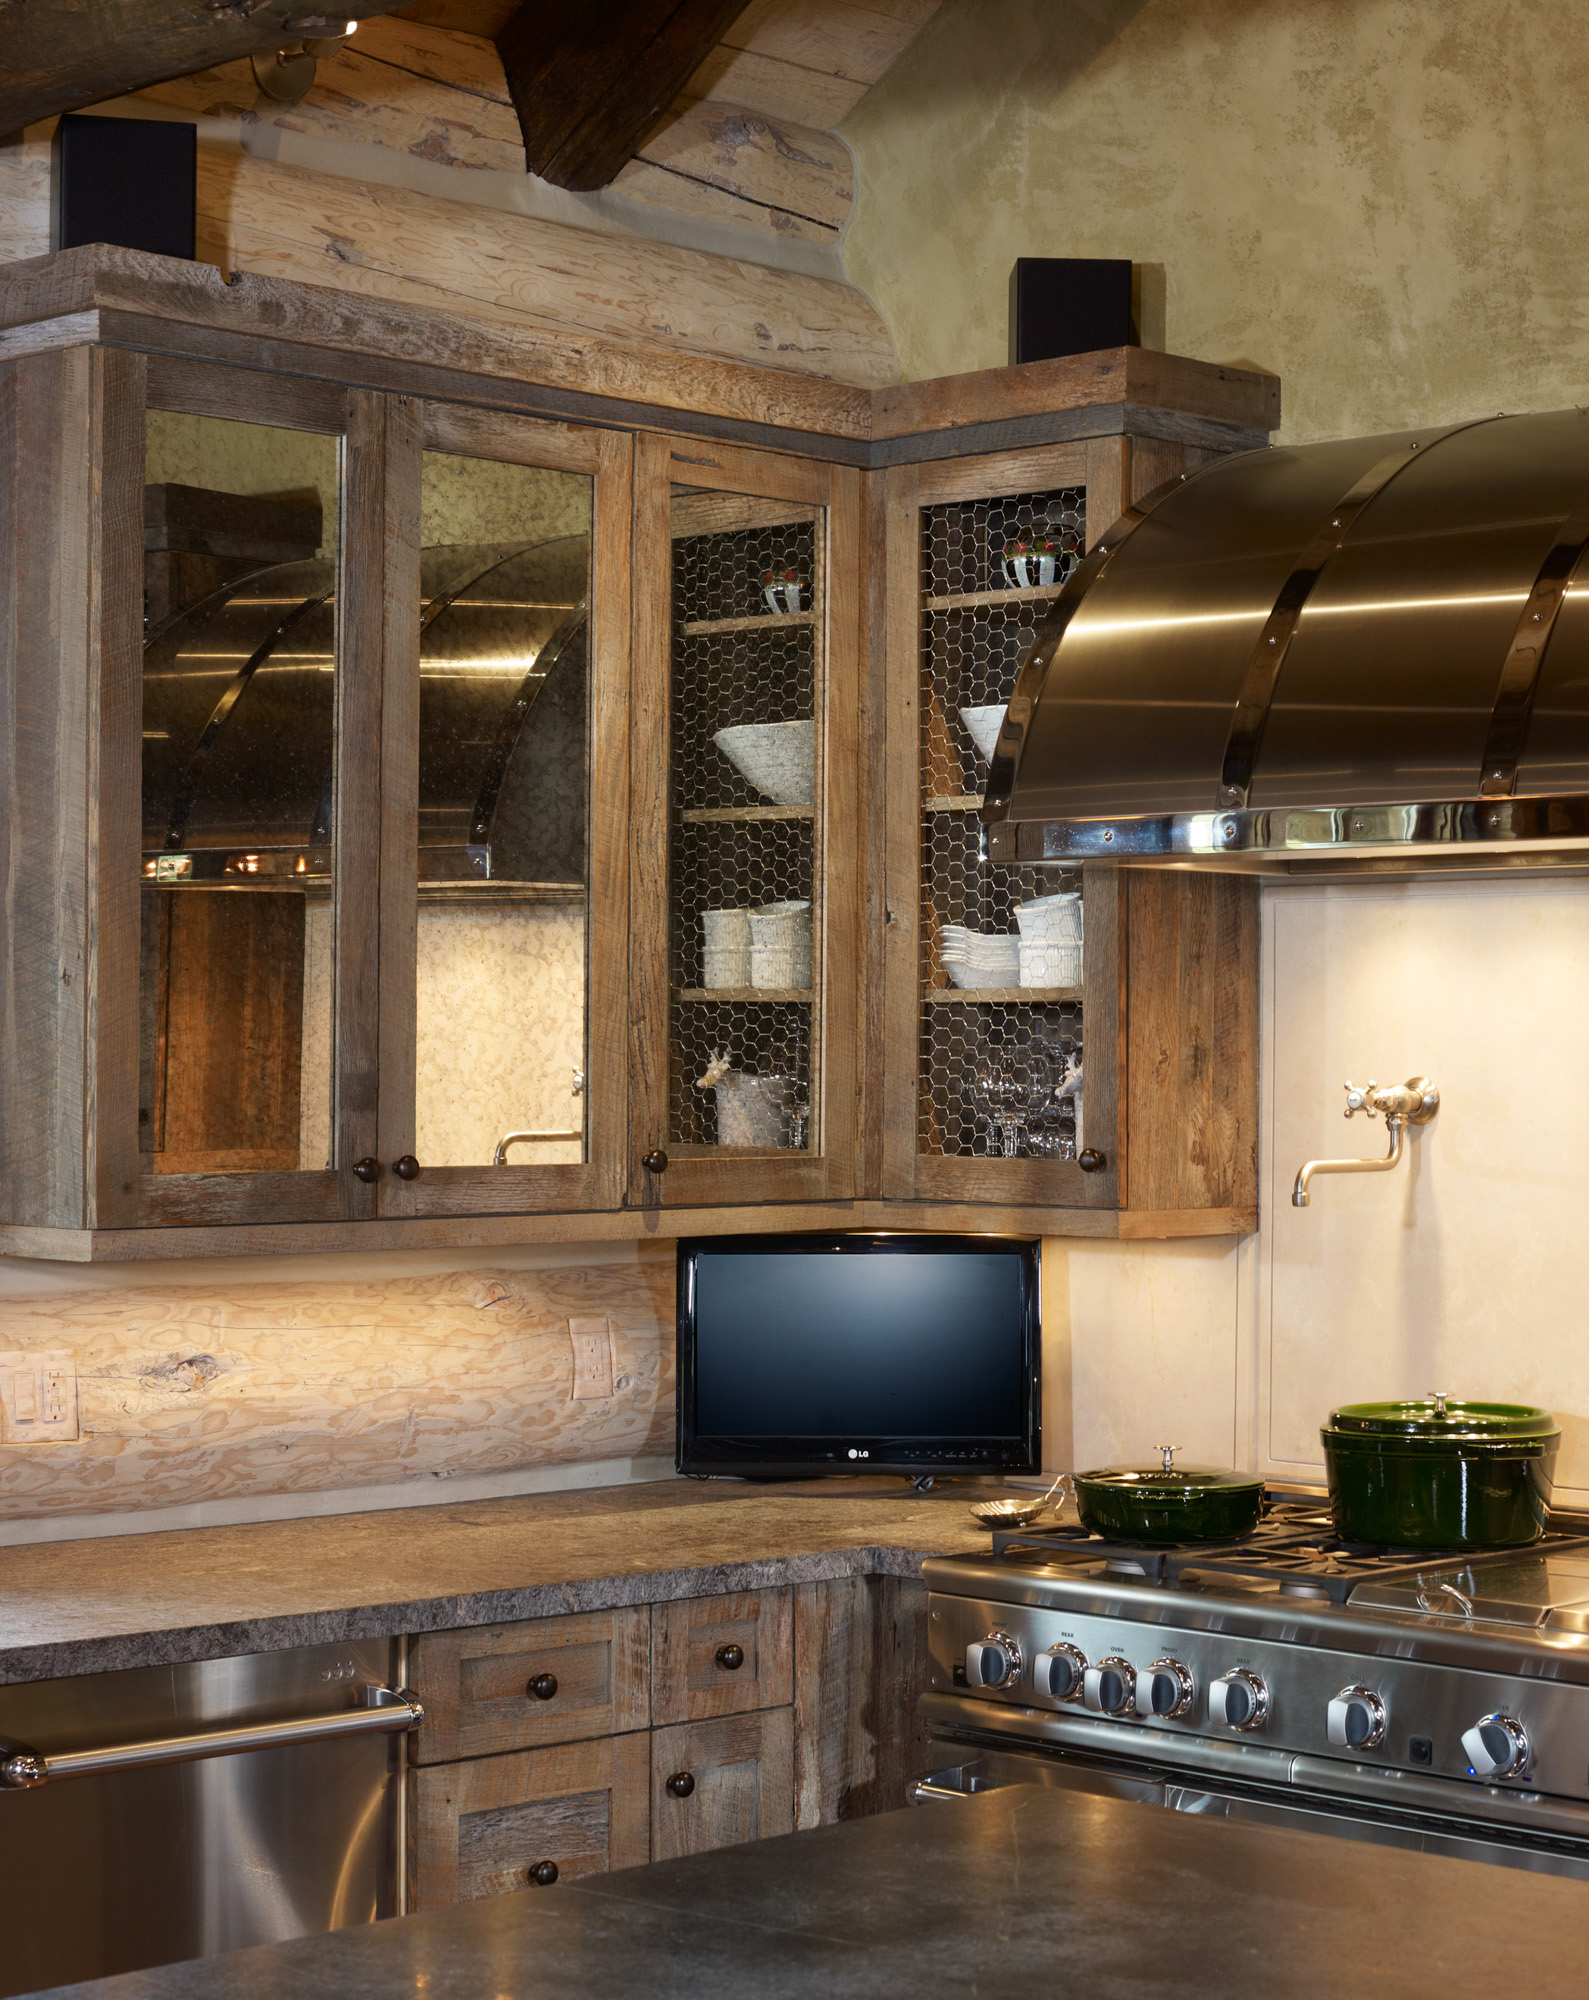 a view of a corner of the kitchen with chicken wire cabinets in dexter meadows